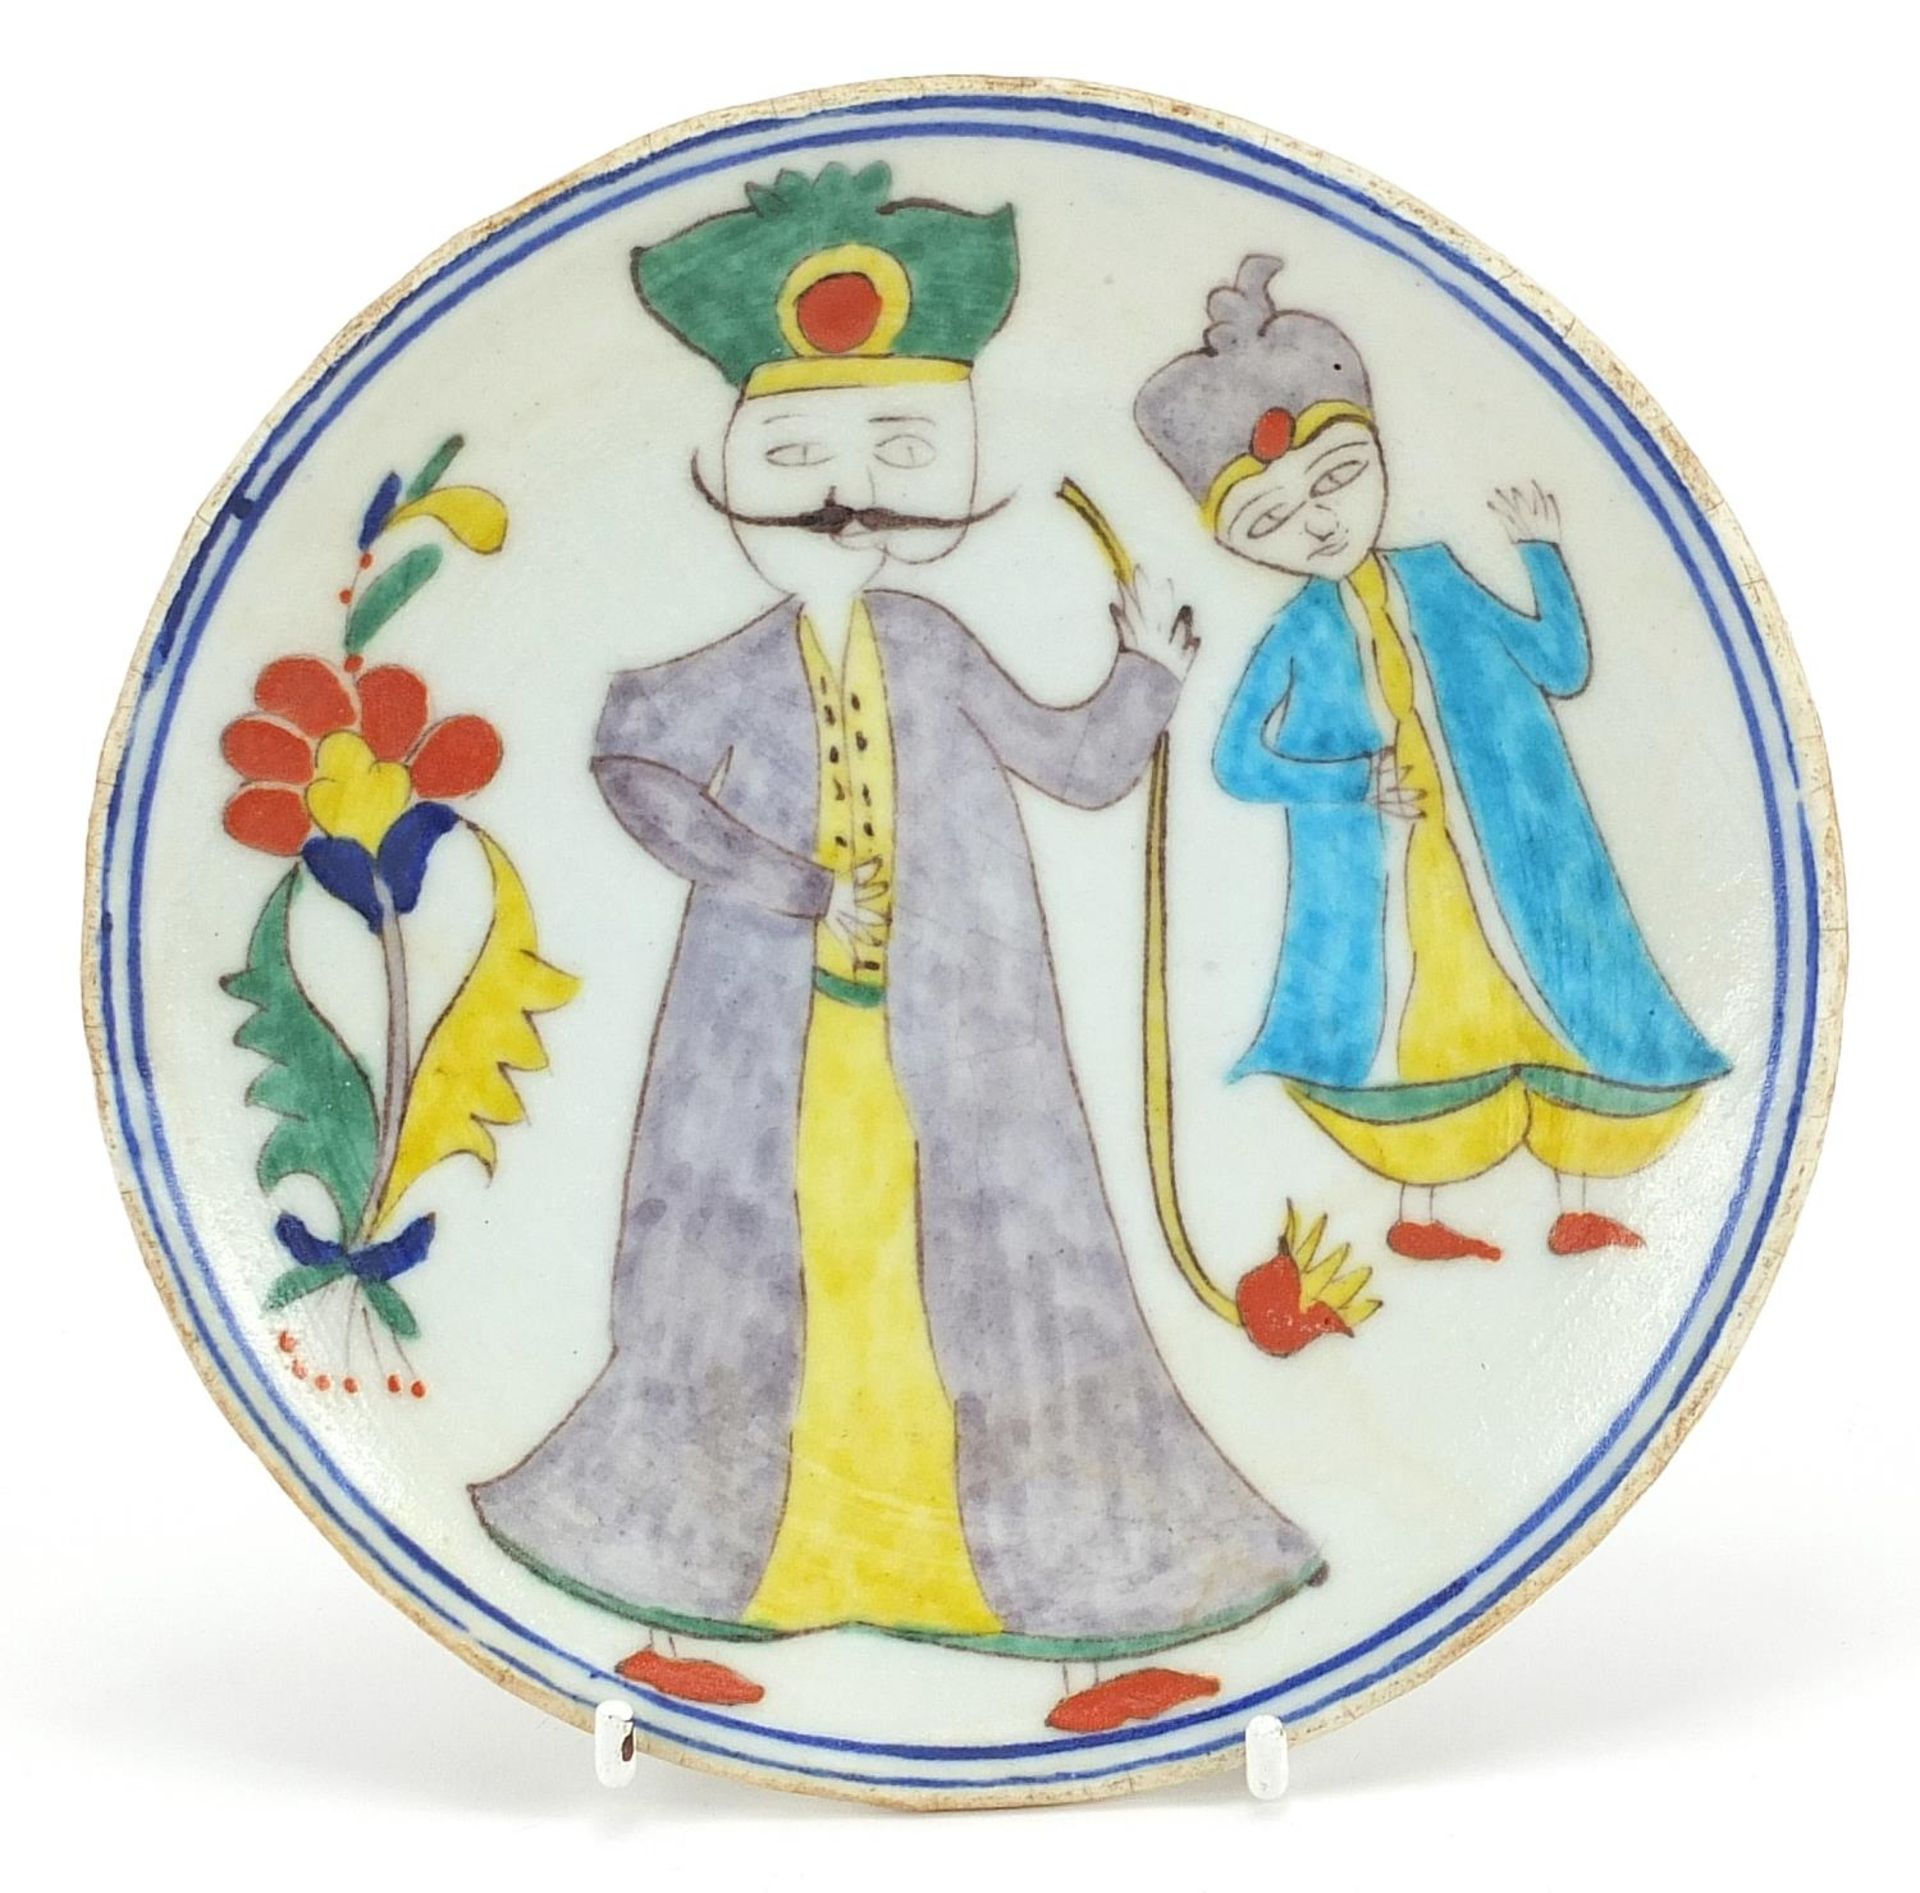 Turkish Kutahya plate hand painted with two figures, 15.5cm in diameter